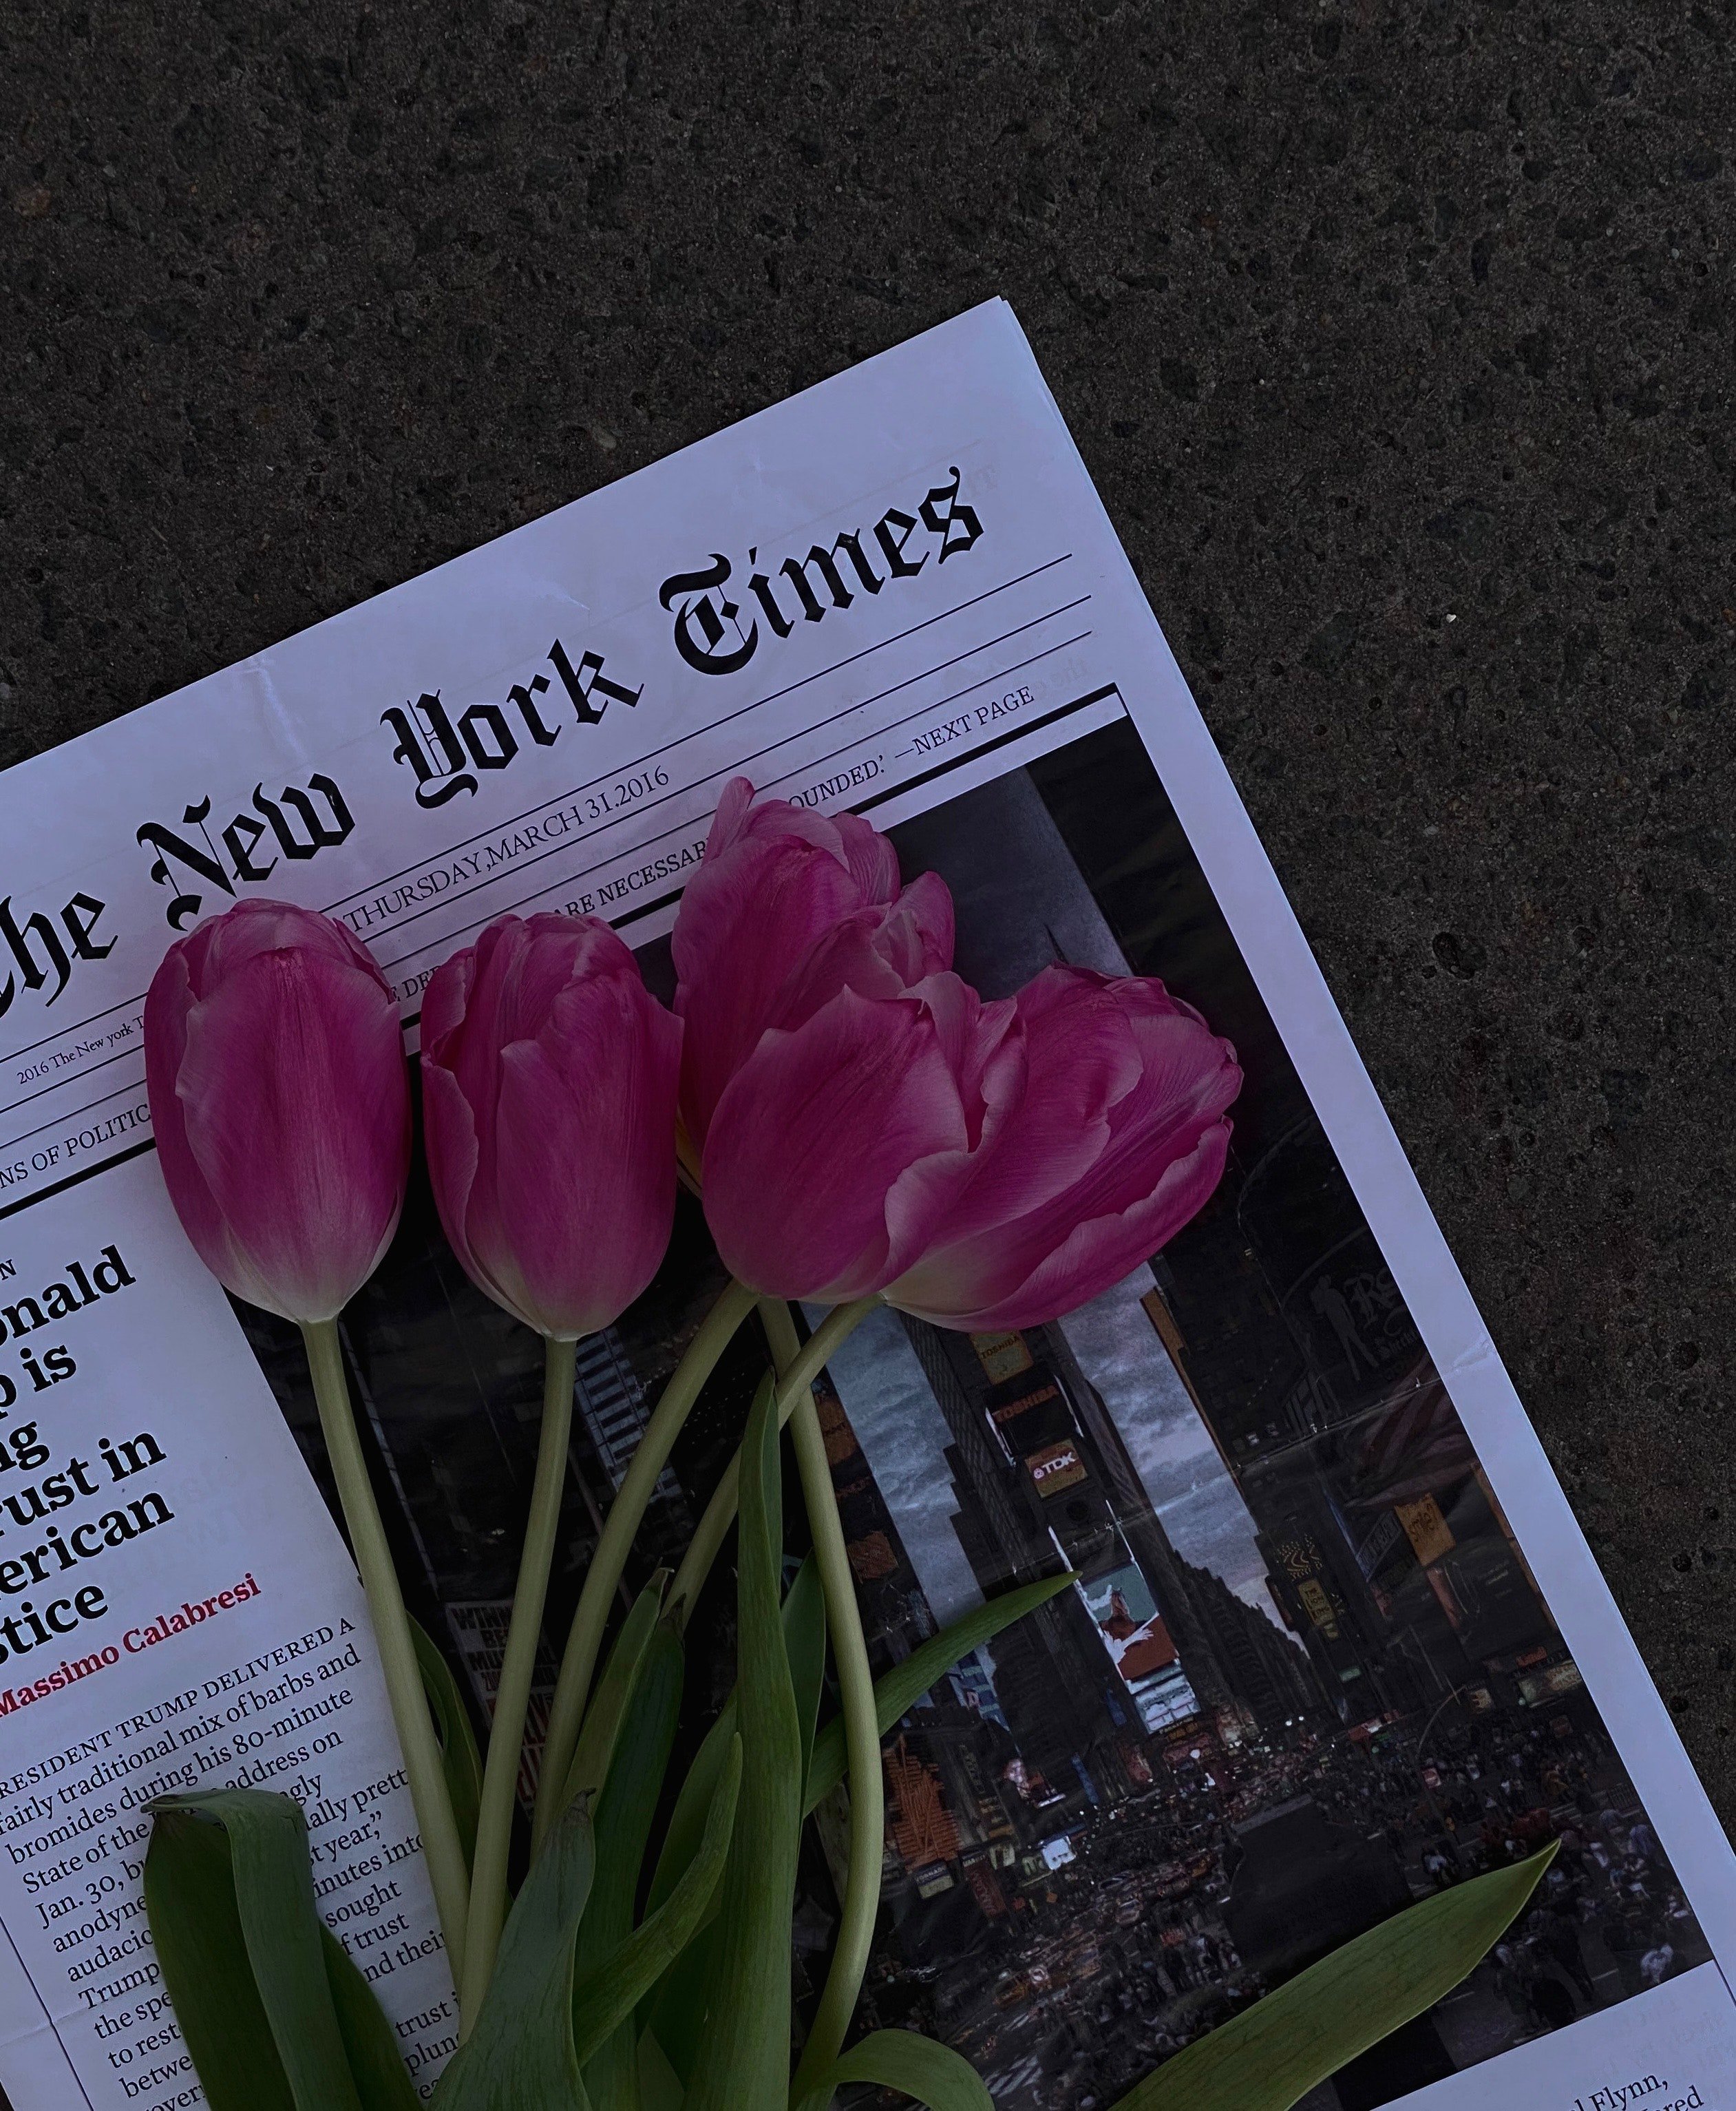 Michael left the newspaper on Agnes' doorstep every day. | Source: Pexels